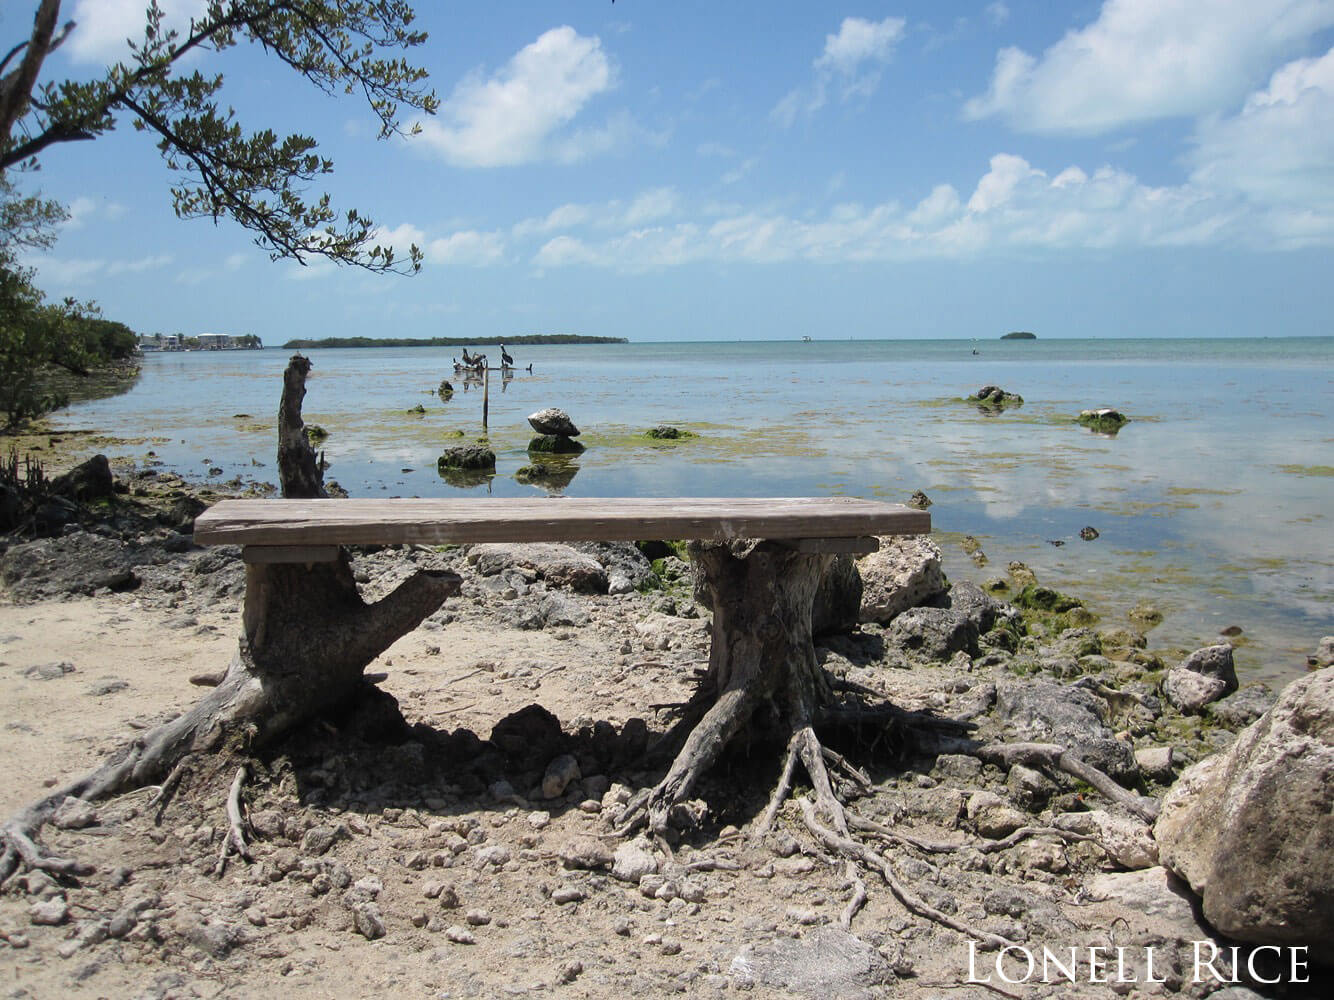 Makeshift table atop two tree stumps on a beach.